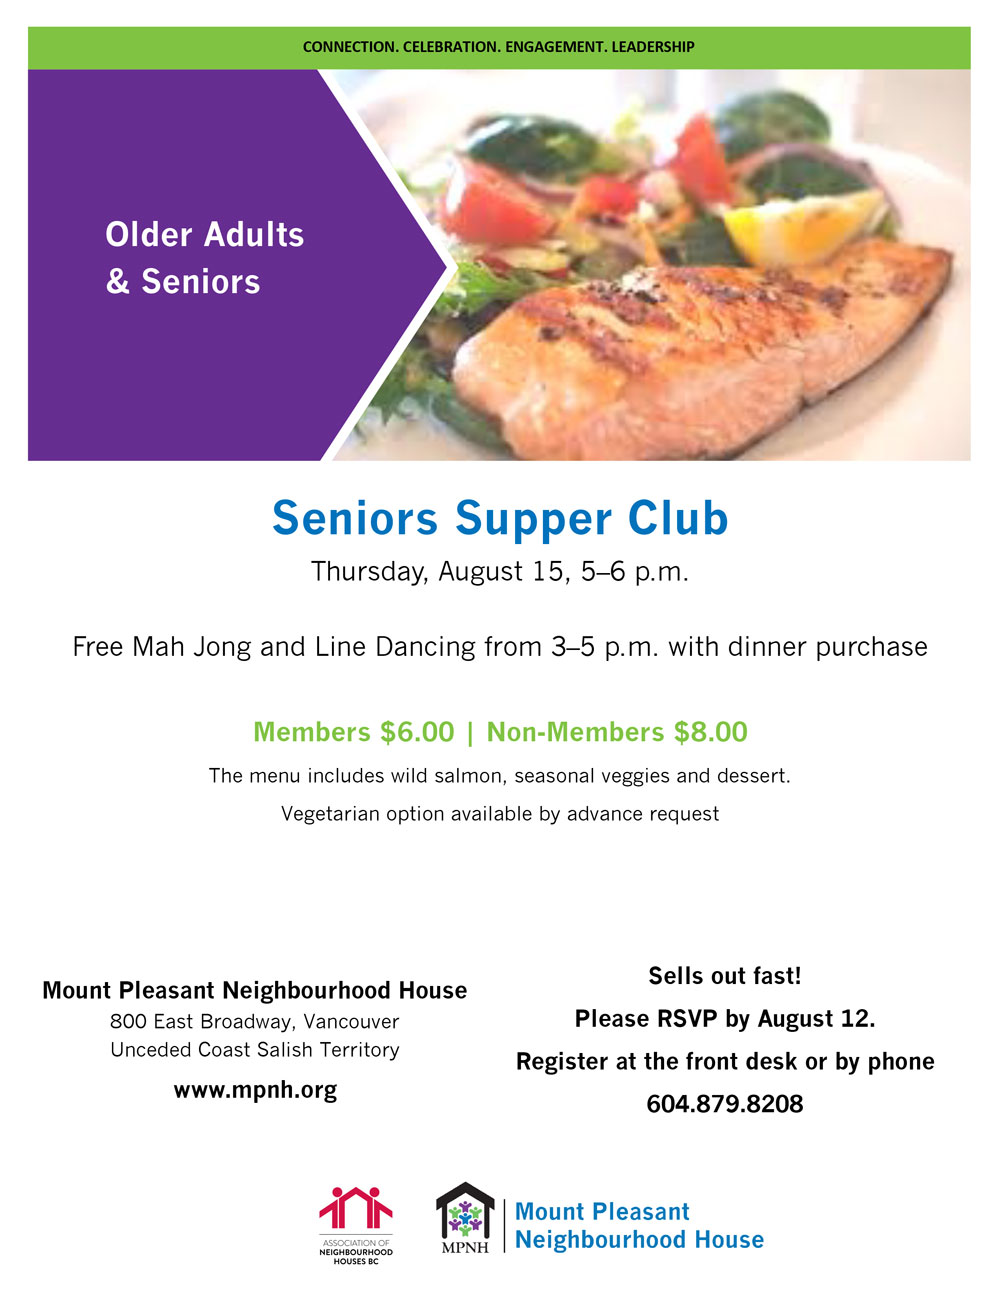 An image of the poster with event details, featuring a meal of grilled salmon and veggies